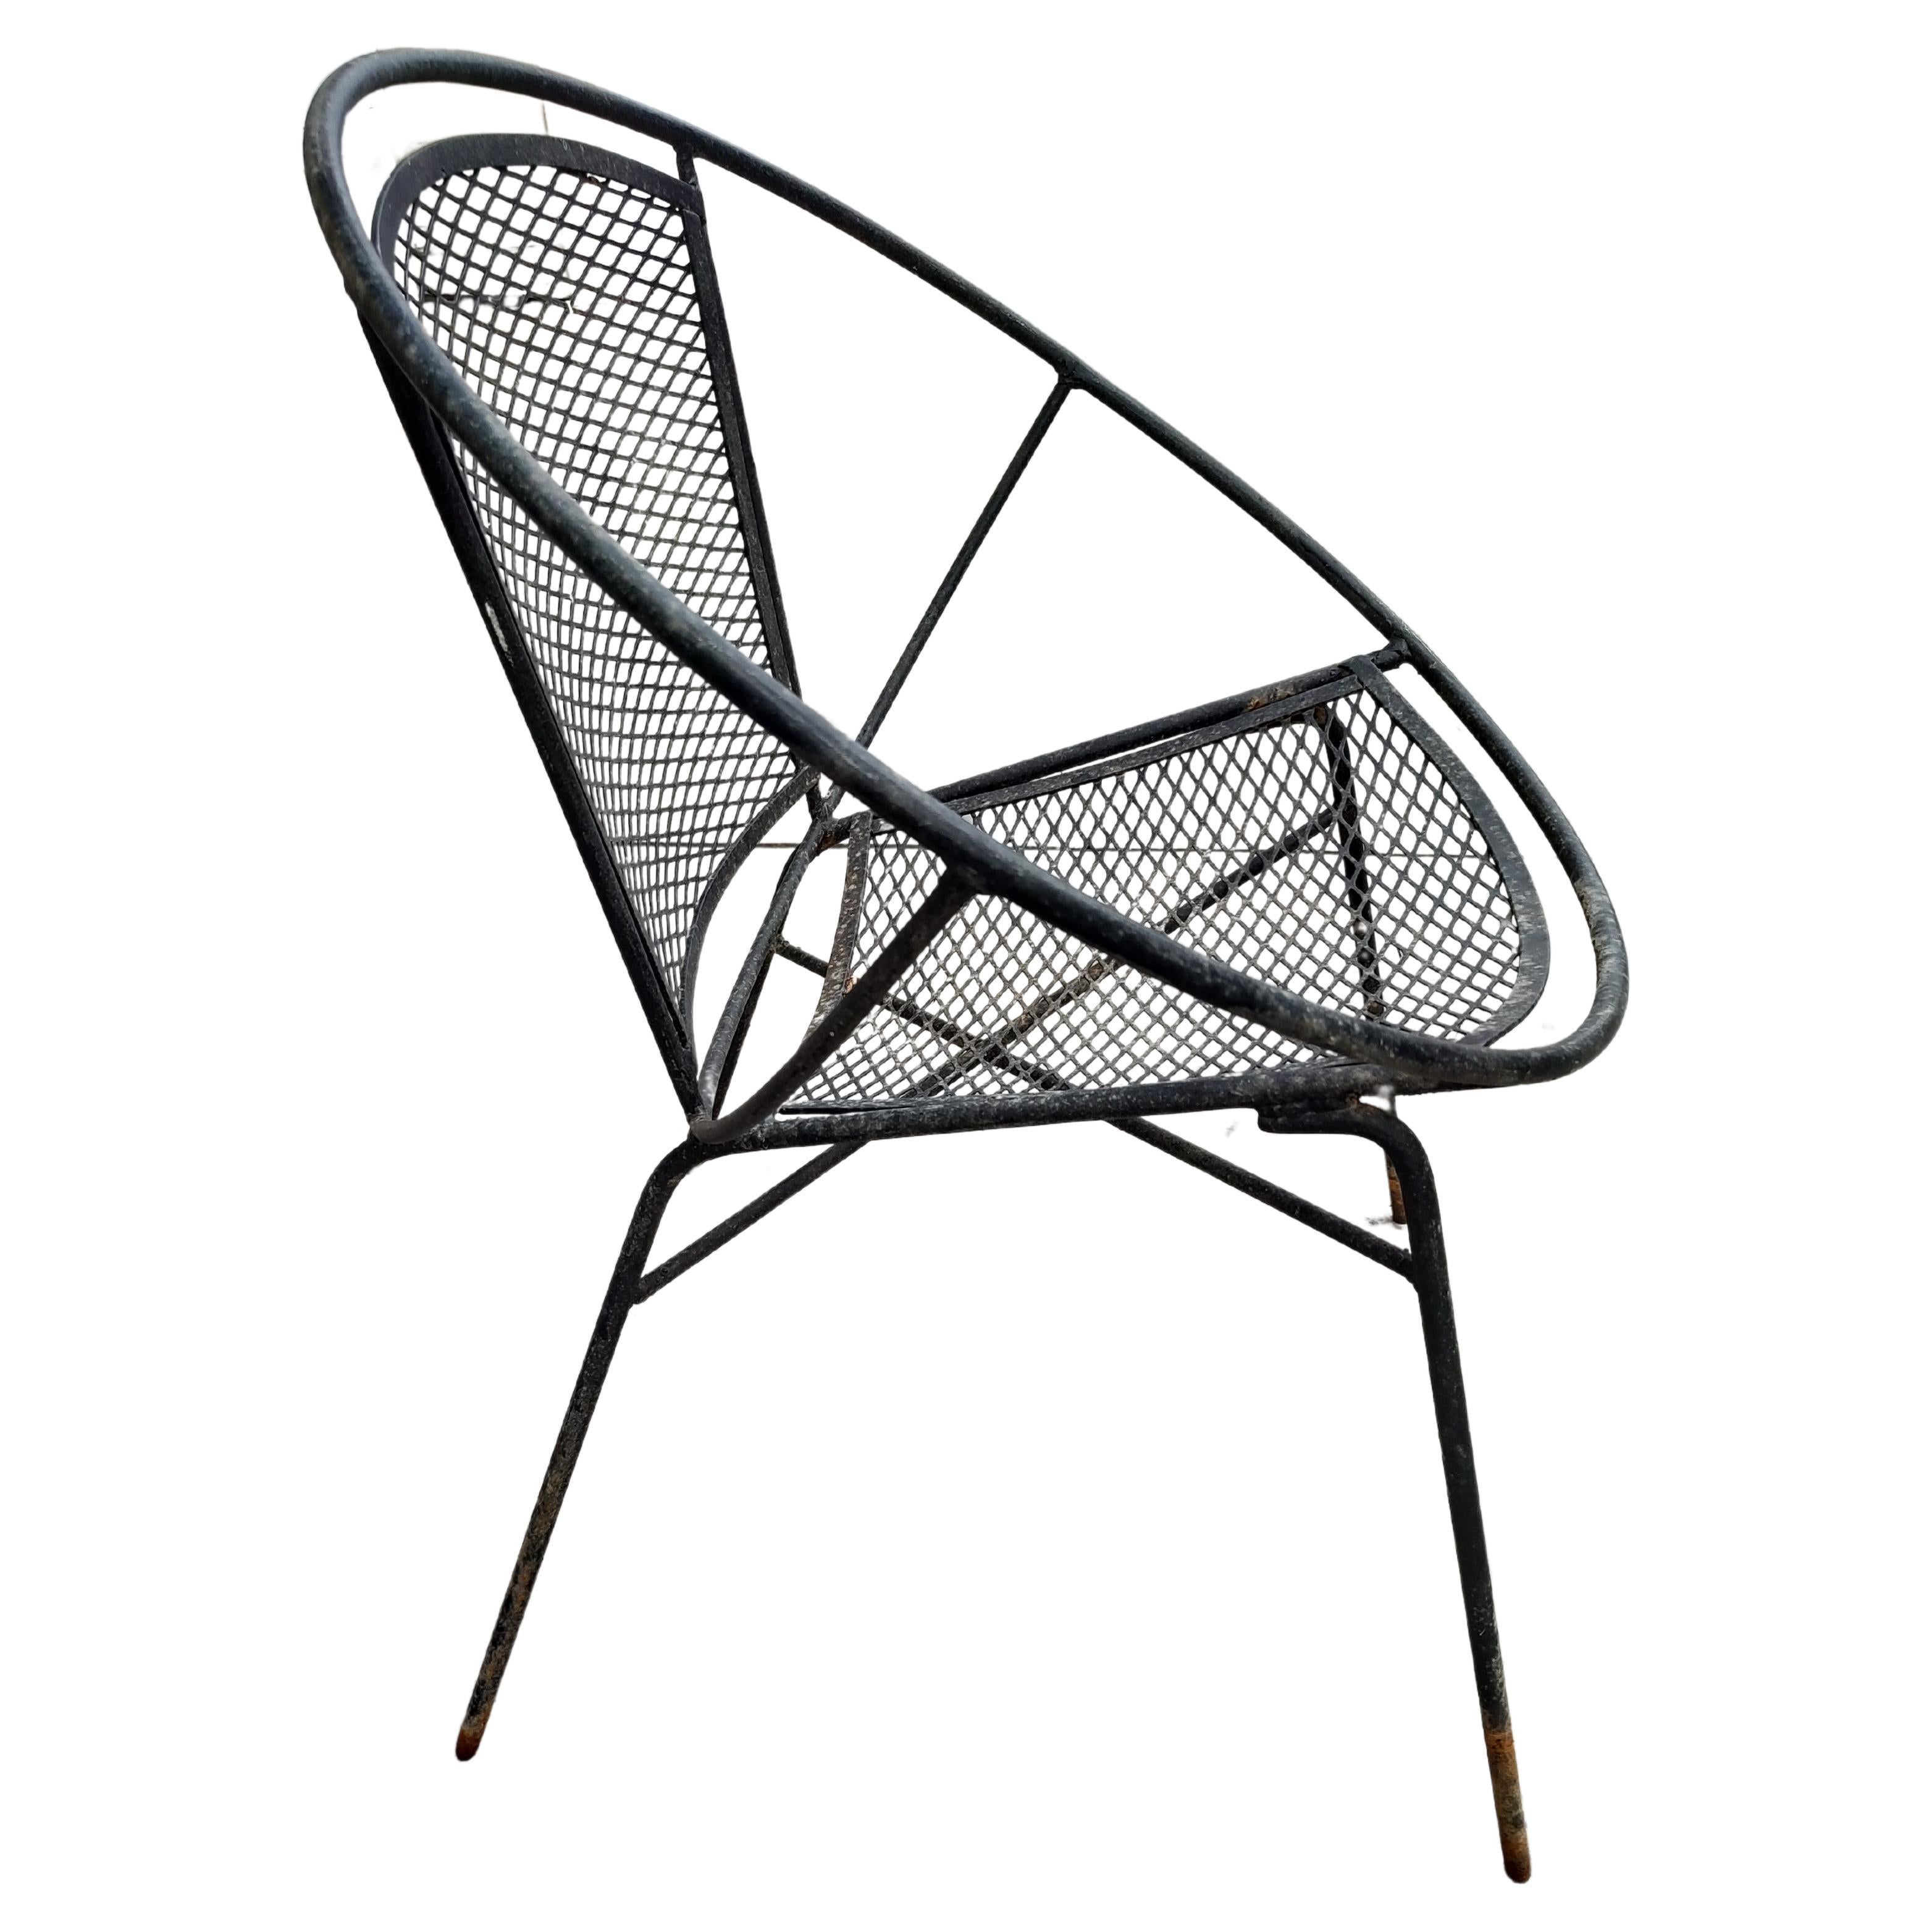 American Mid-Century Modern 5pc Iron Hoop Chairs with Table by Maurizio Tempestini For Sale